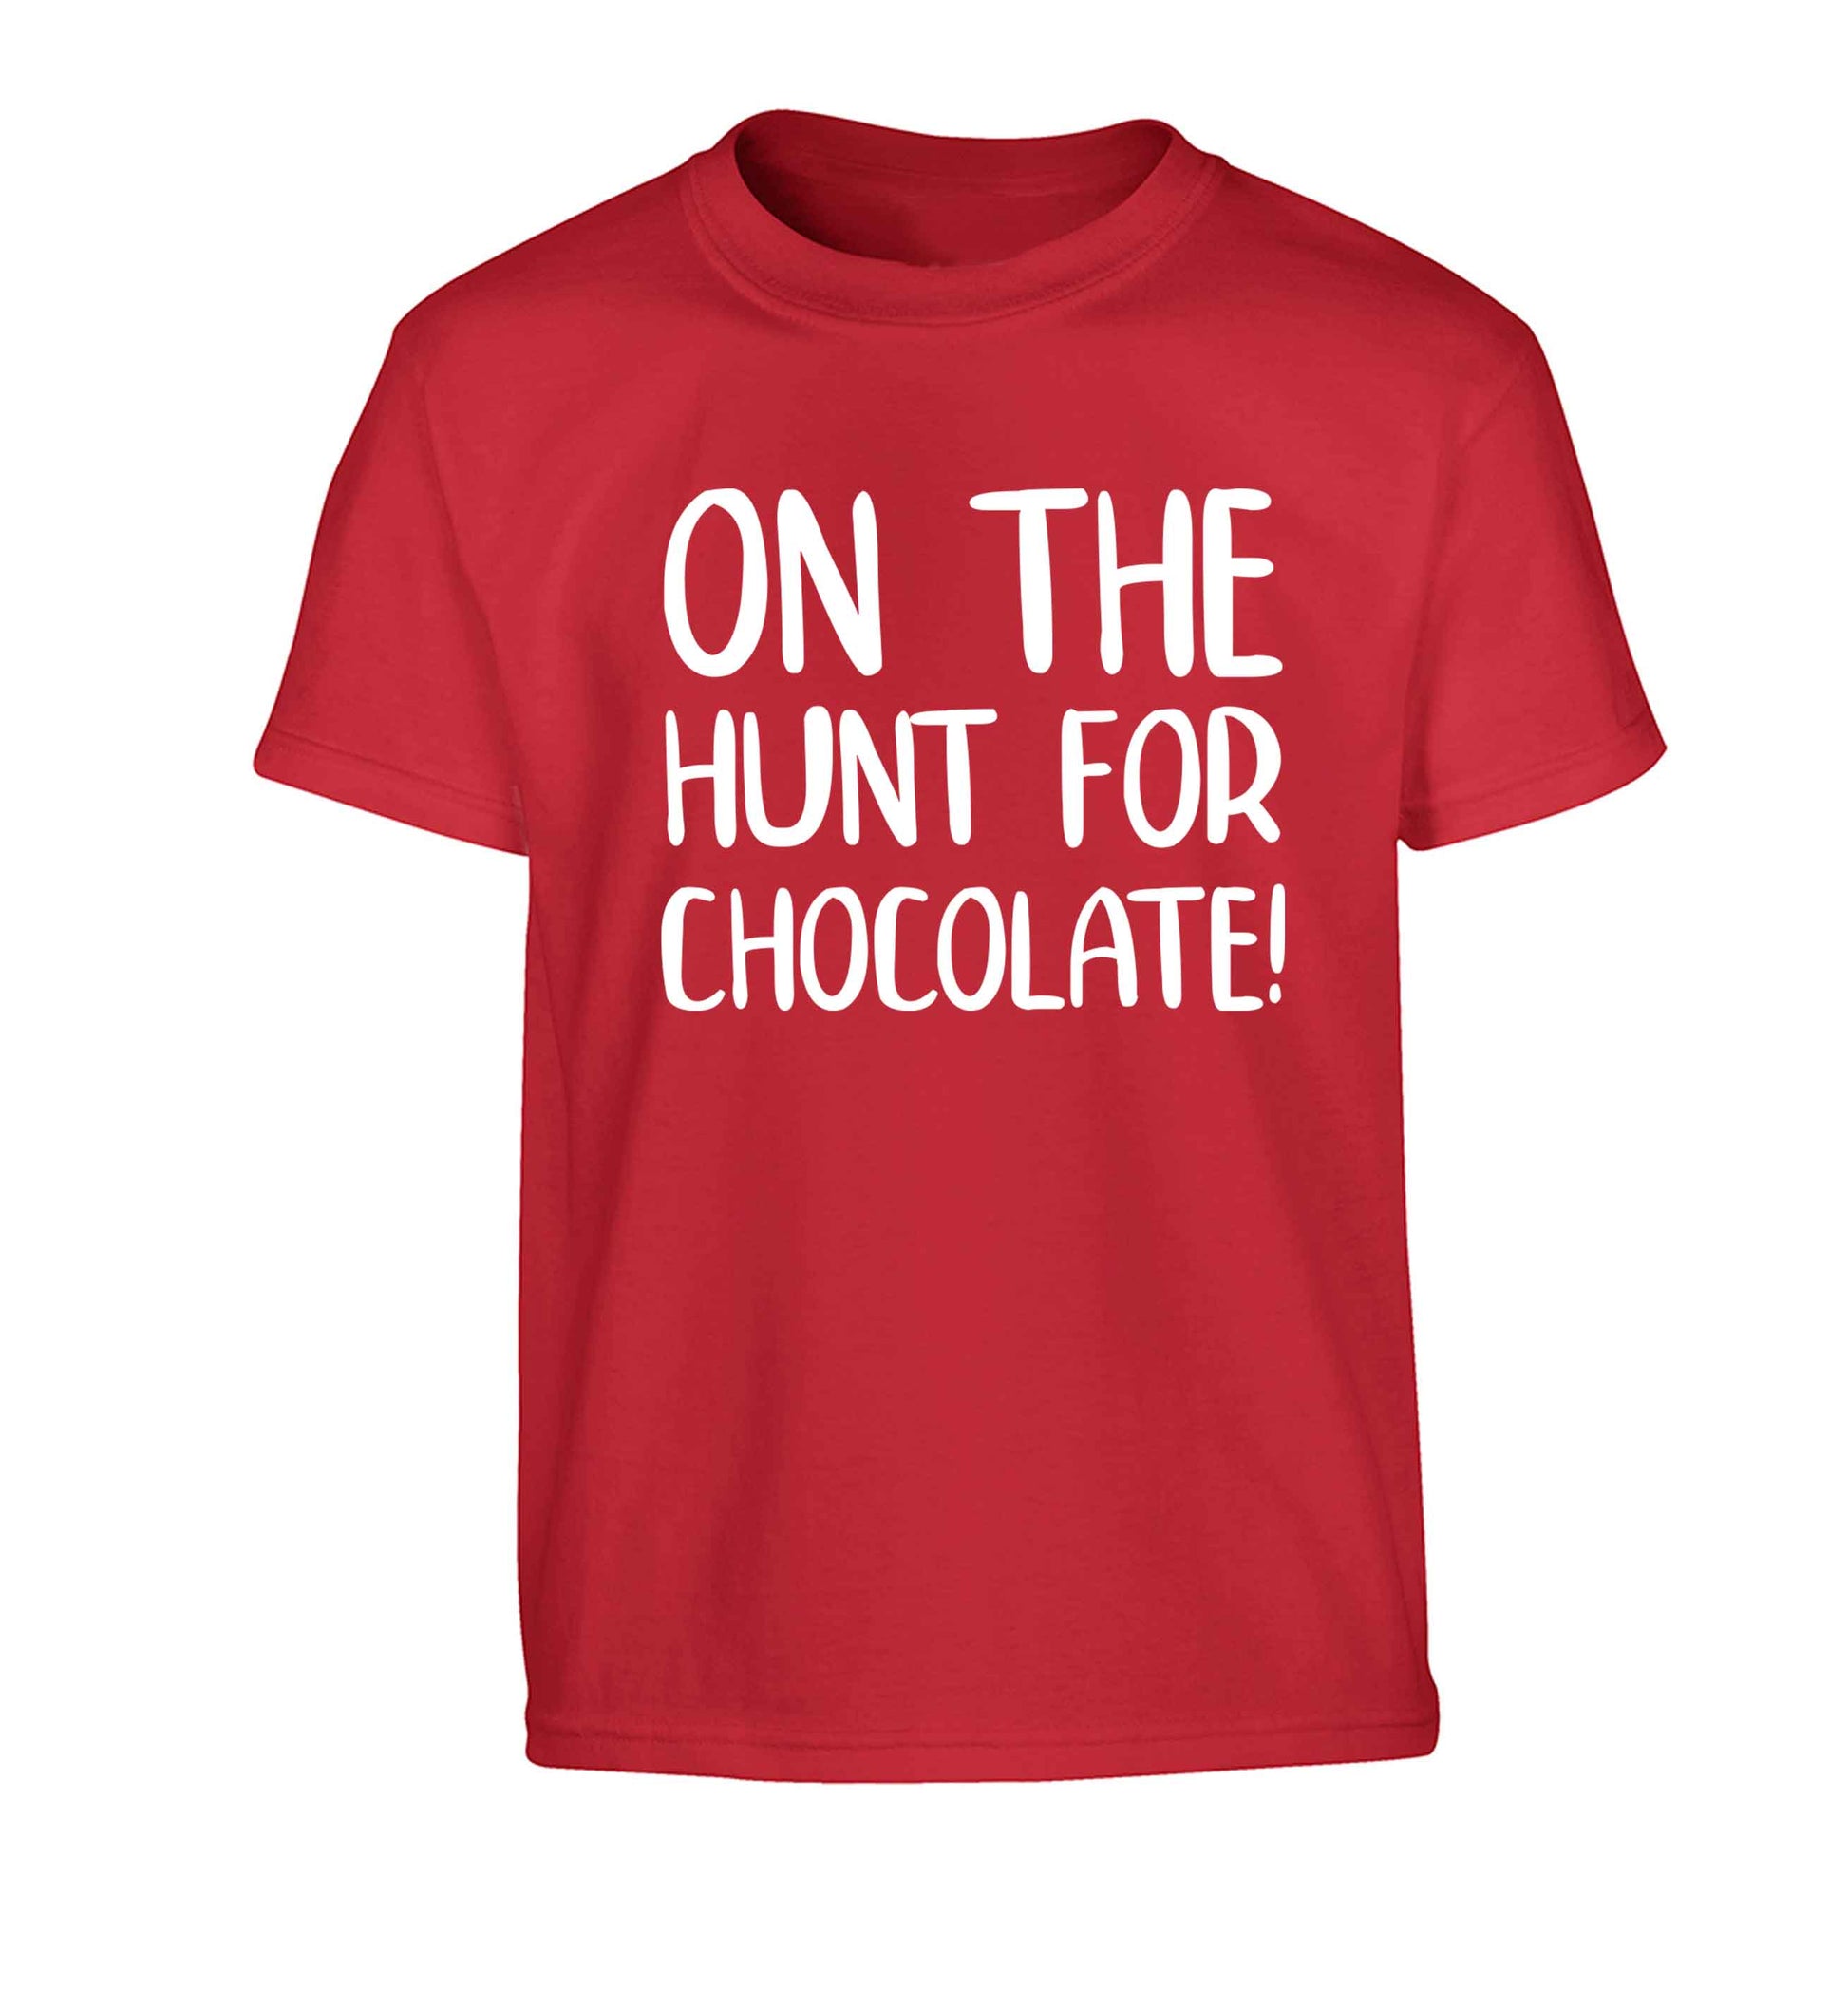 On the hunt for chocolate! Children's red Tshirt 12-13 Years